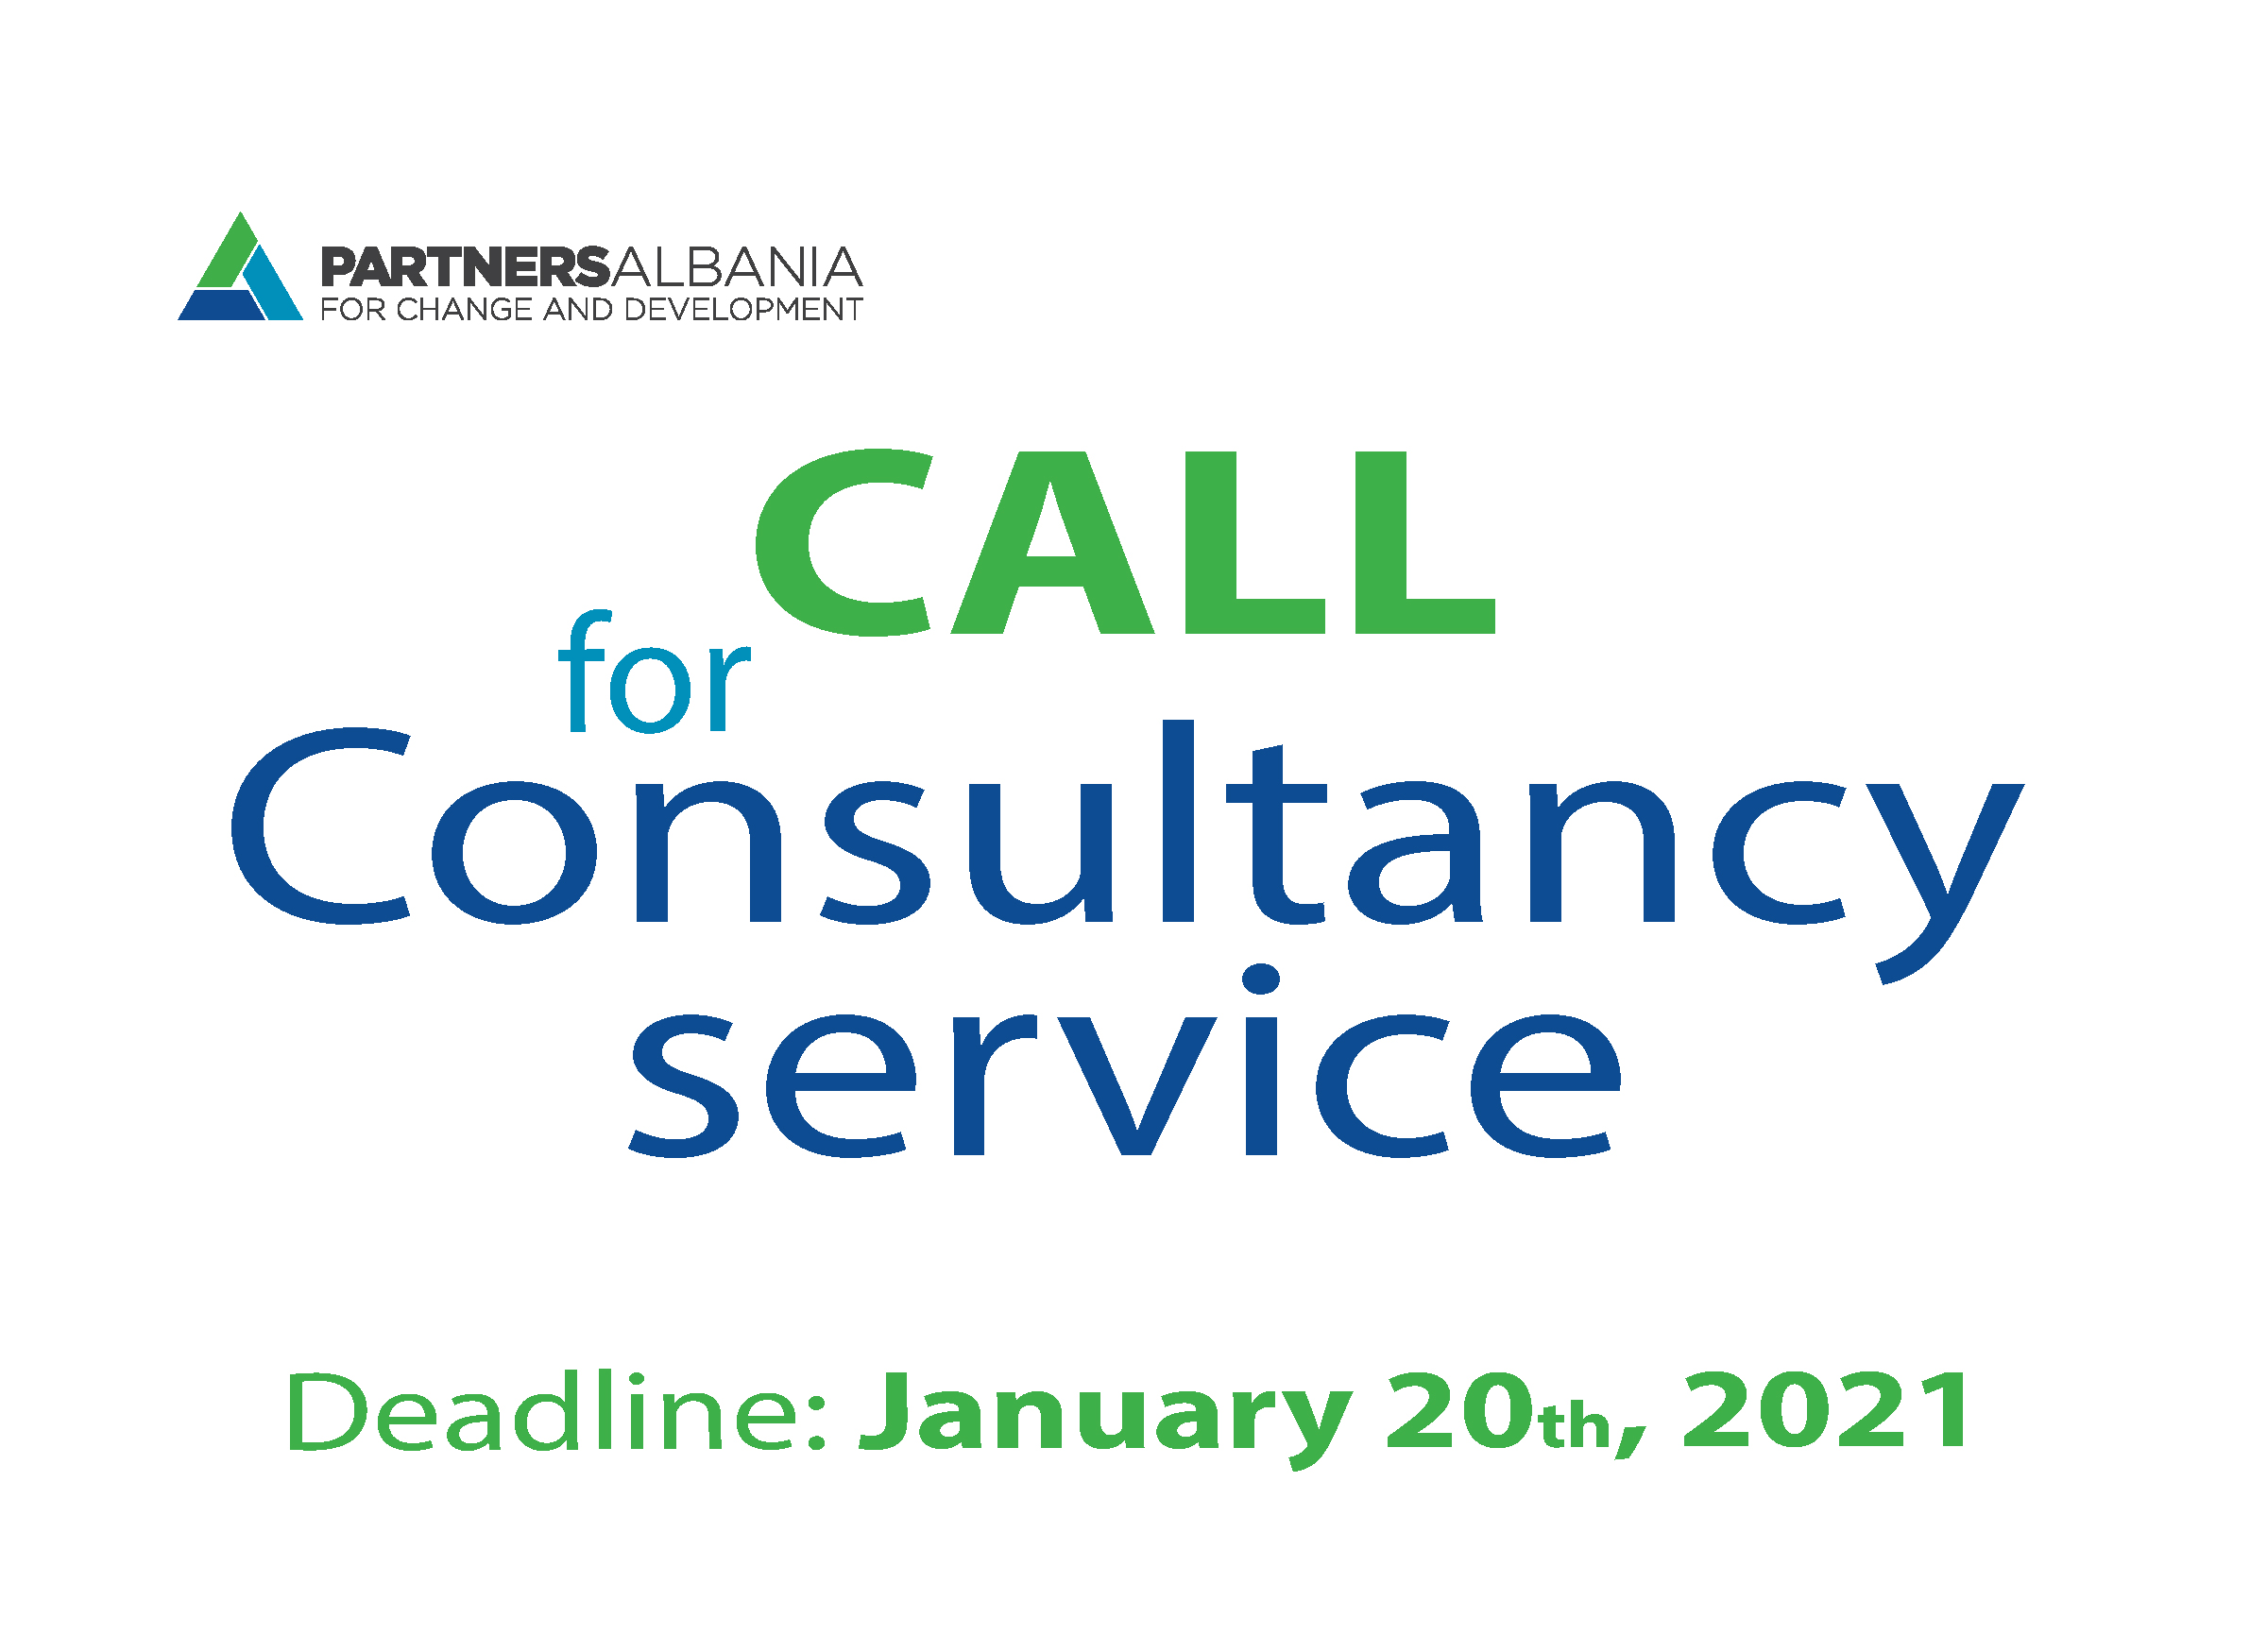 Call for consultancy service Partners Albania for Change and Development